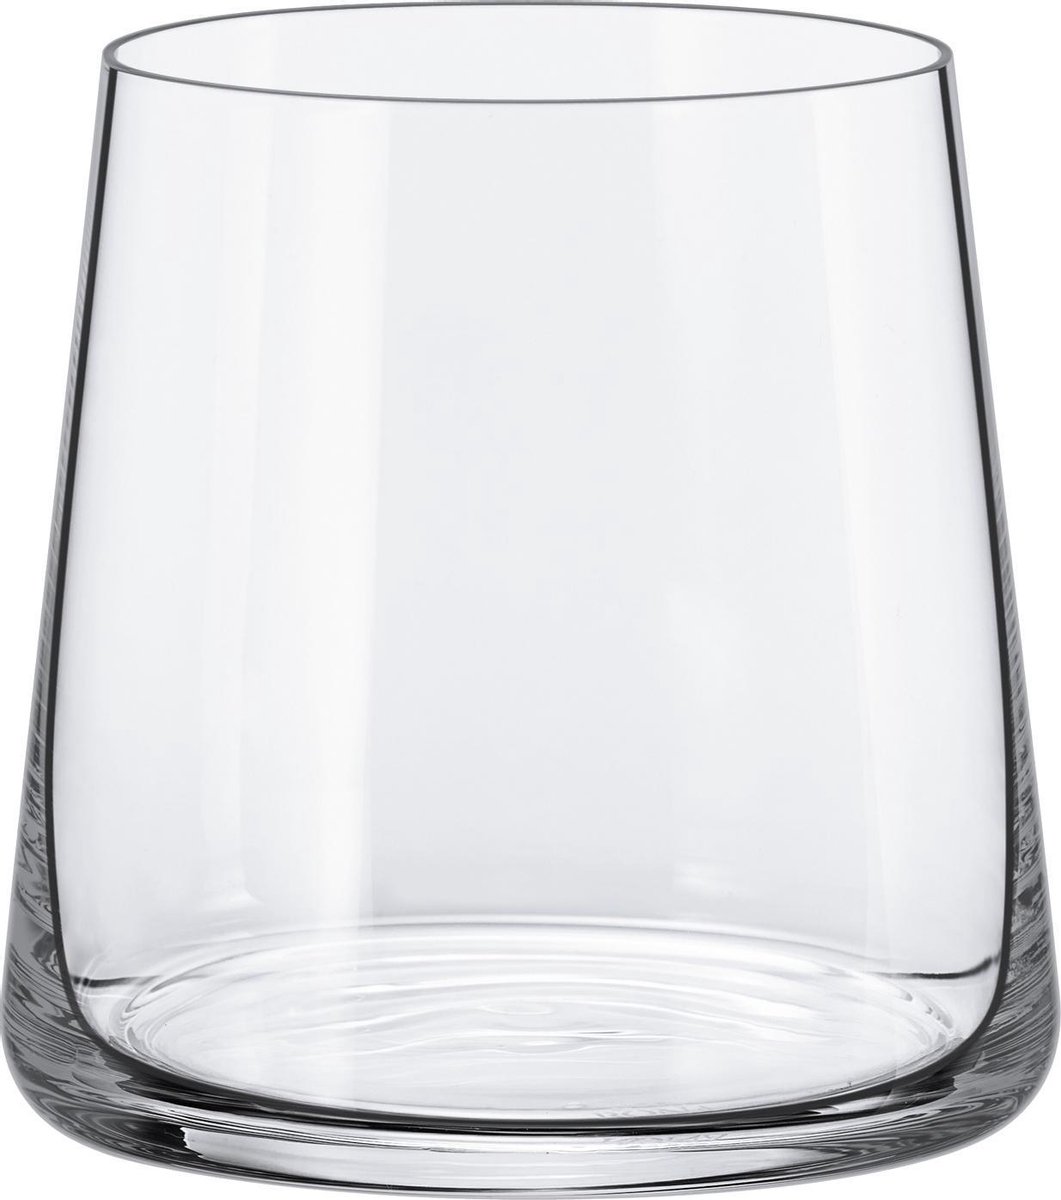 RONA - Water/frisdrank/cocktail glas 41cl 